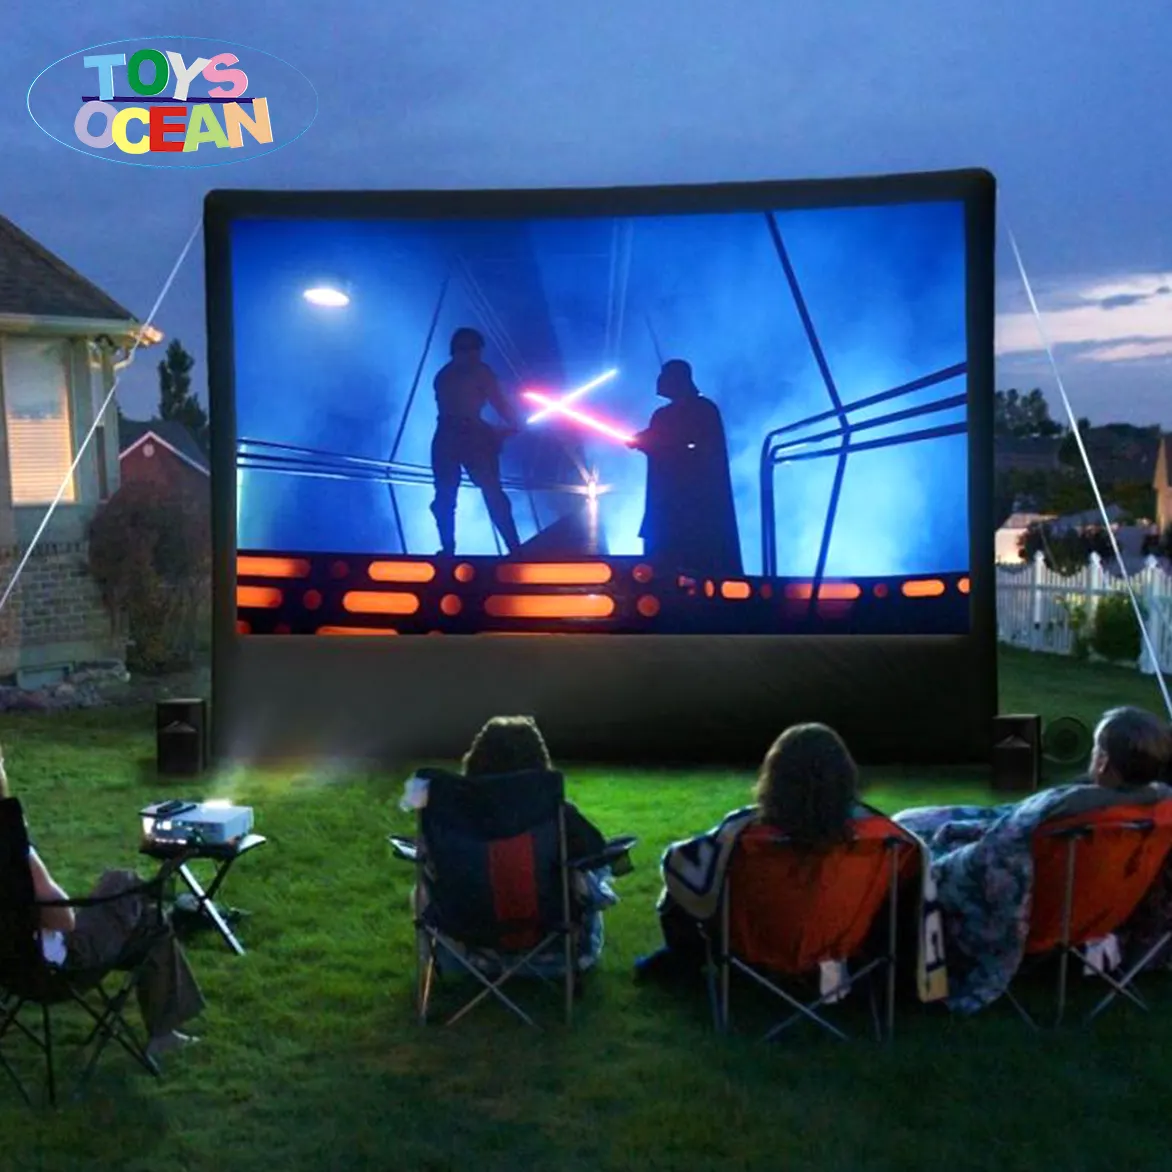 New hot sale 16: 9 inflatable movie projection screen for outdoor inflatable projection screens in movie theaters